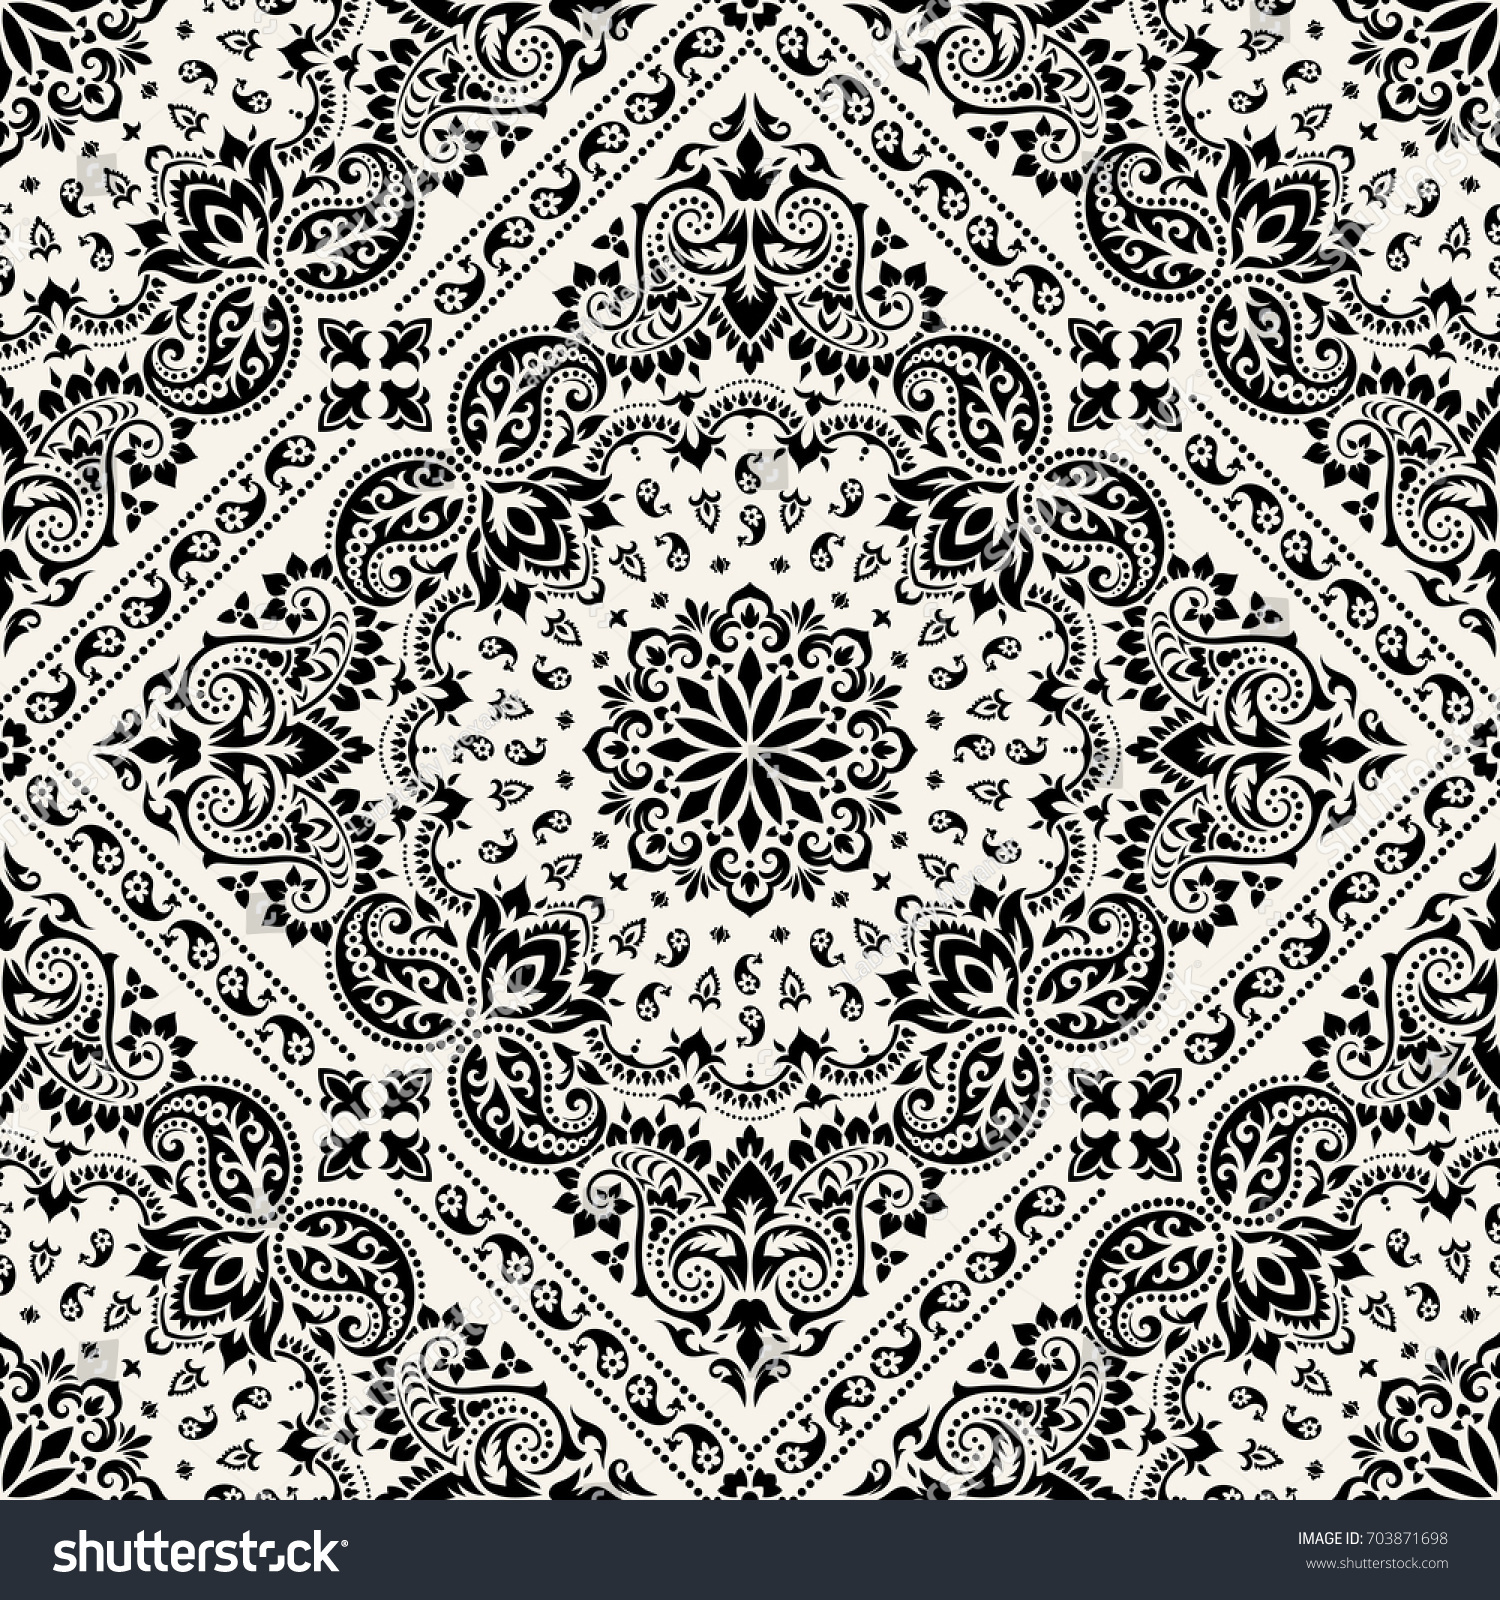 SVG of Vector ornament paisley seamless Bandana Print, silk neck scarf or kerchief square pattern design style for print on fabric. svg